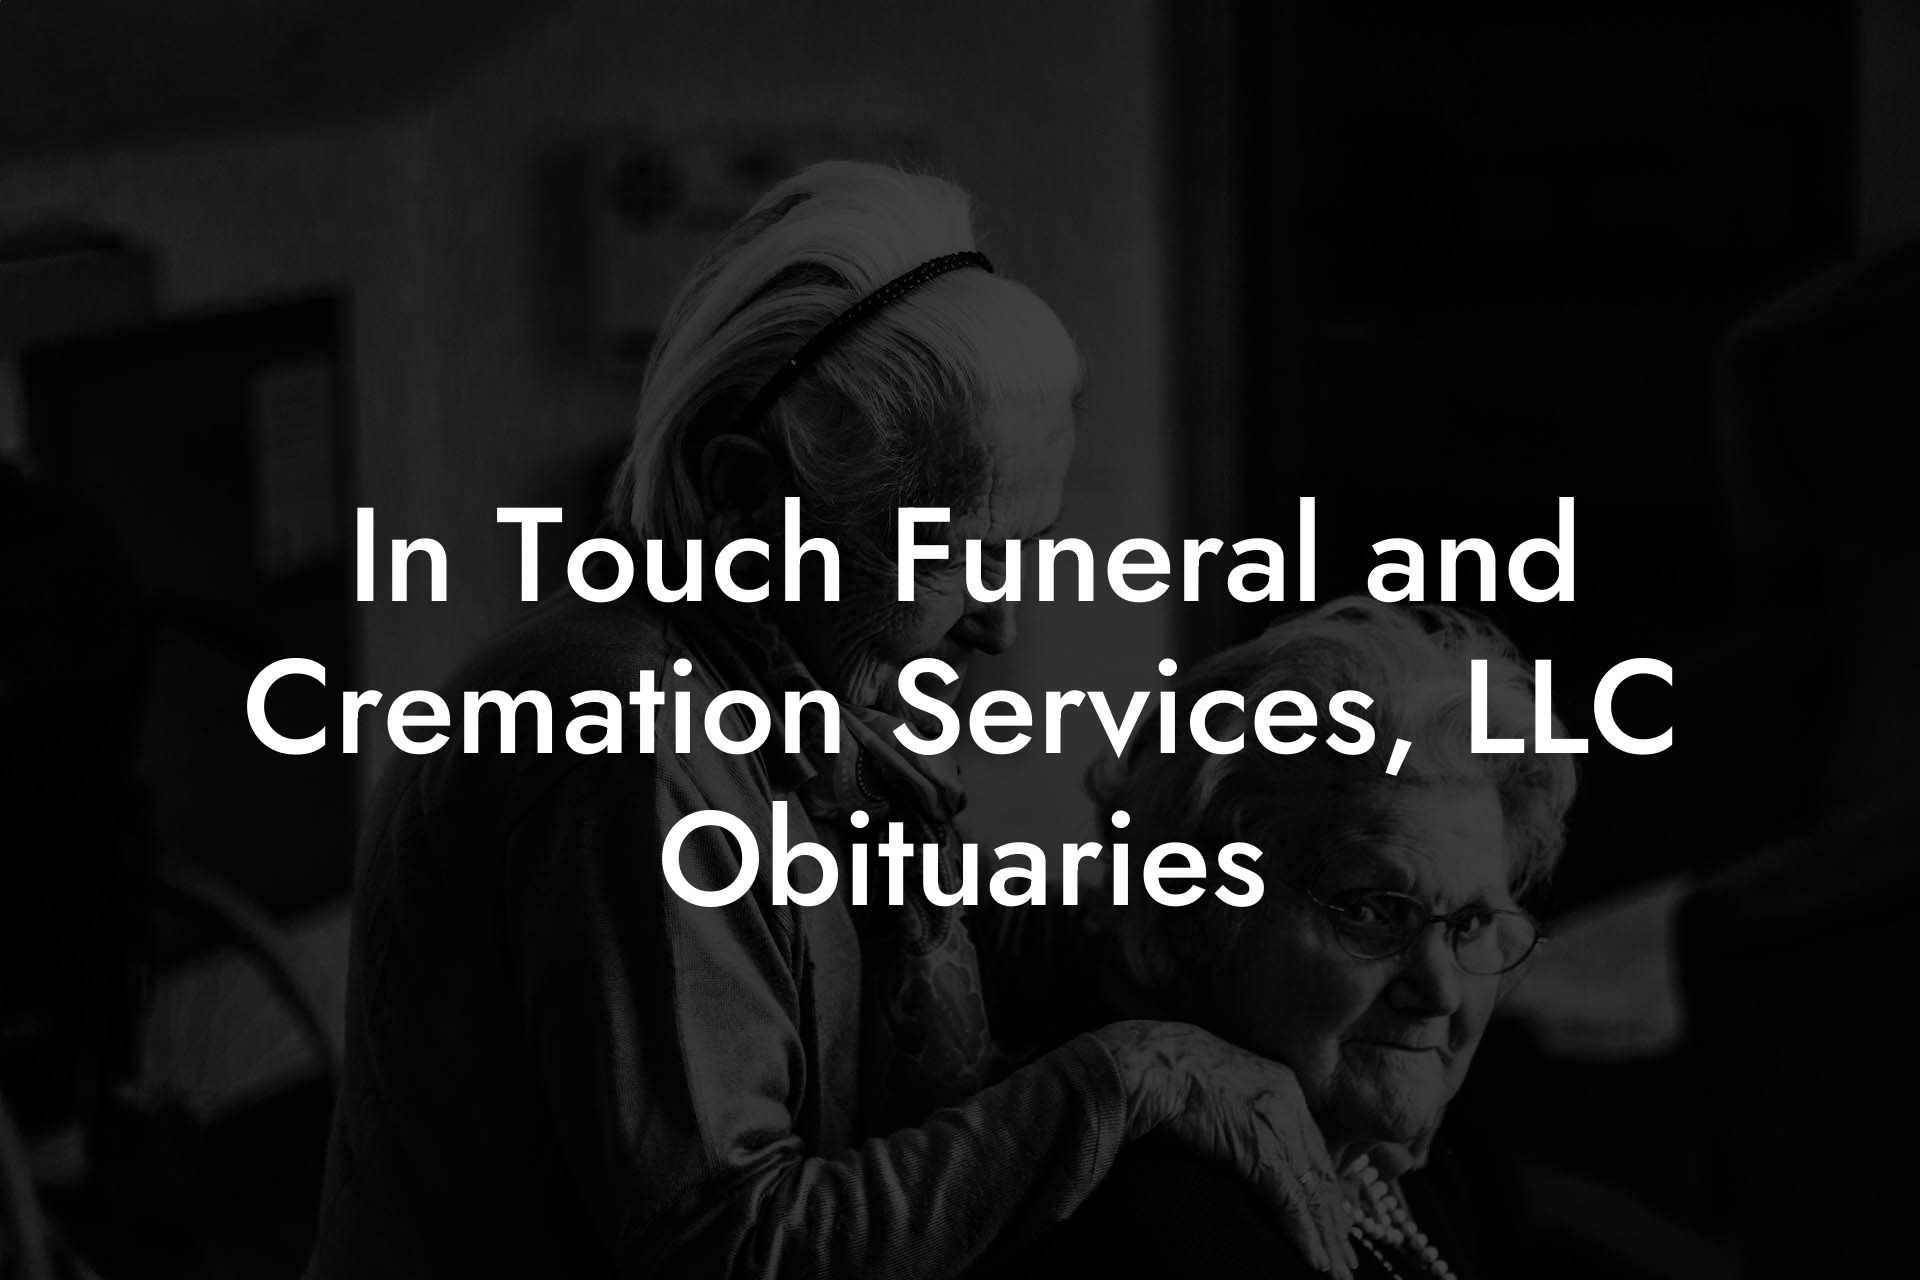 In Touch Funeral and Cremation Services, LLC Obituaries